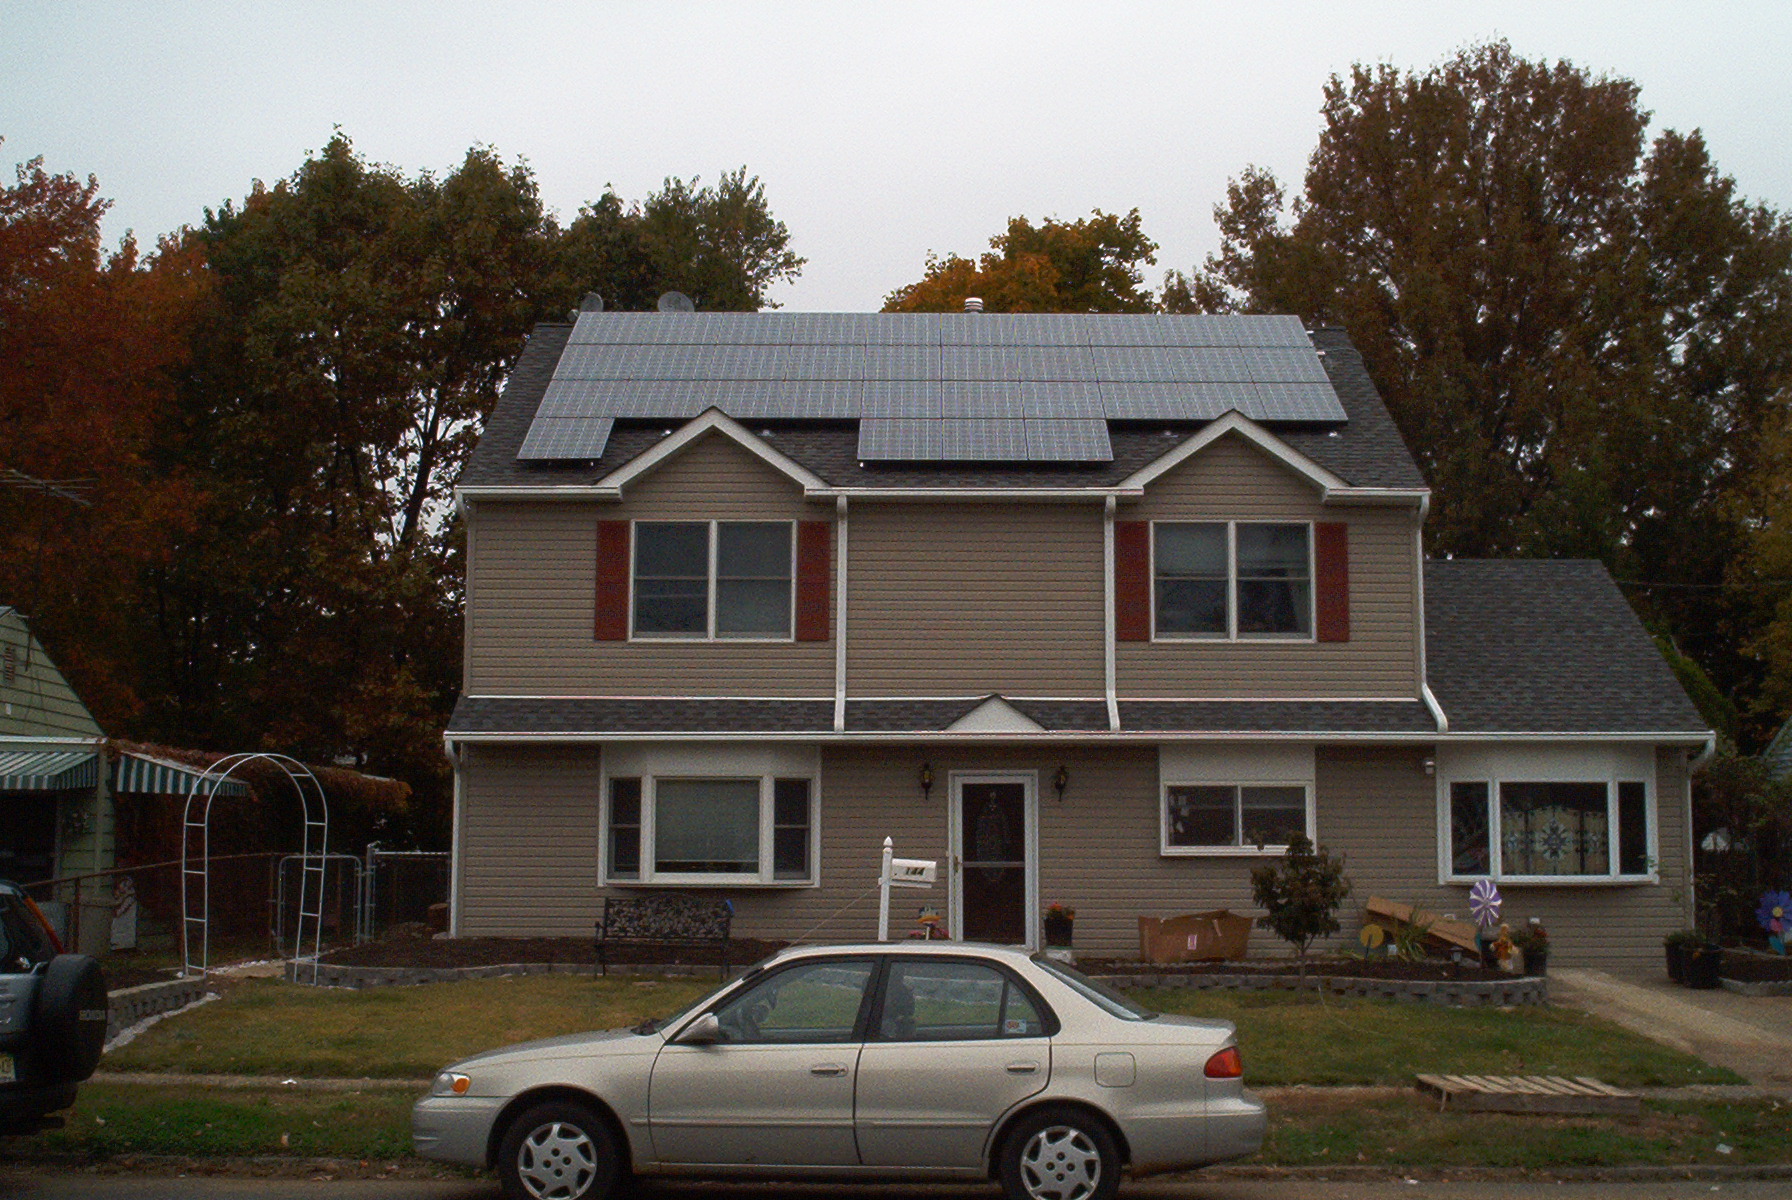 Home with solar power